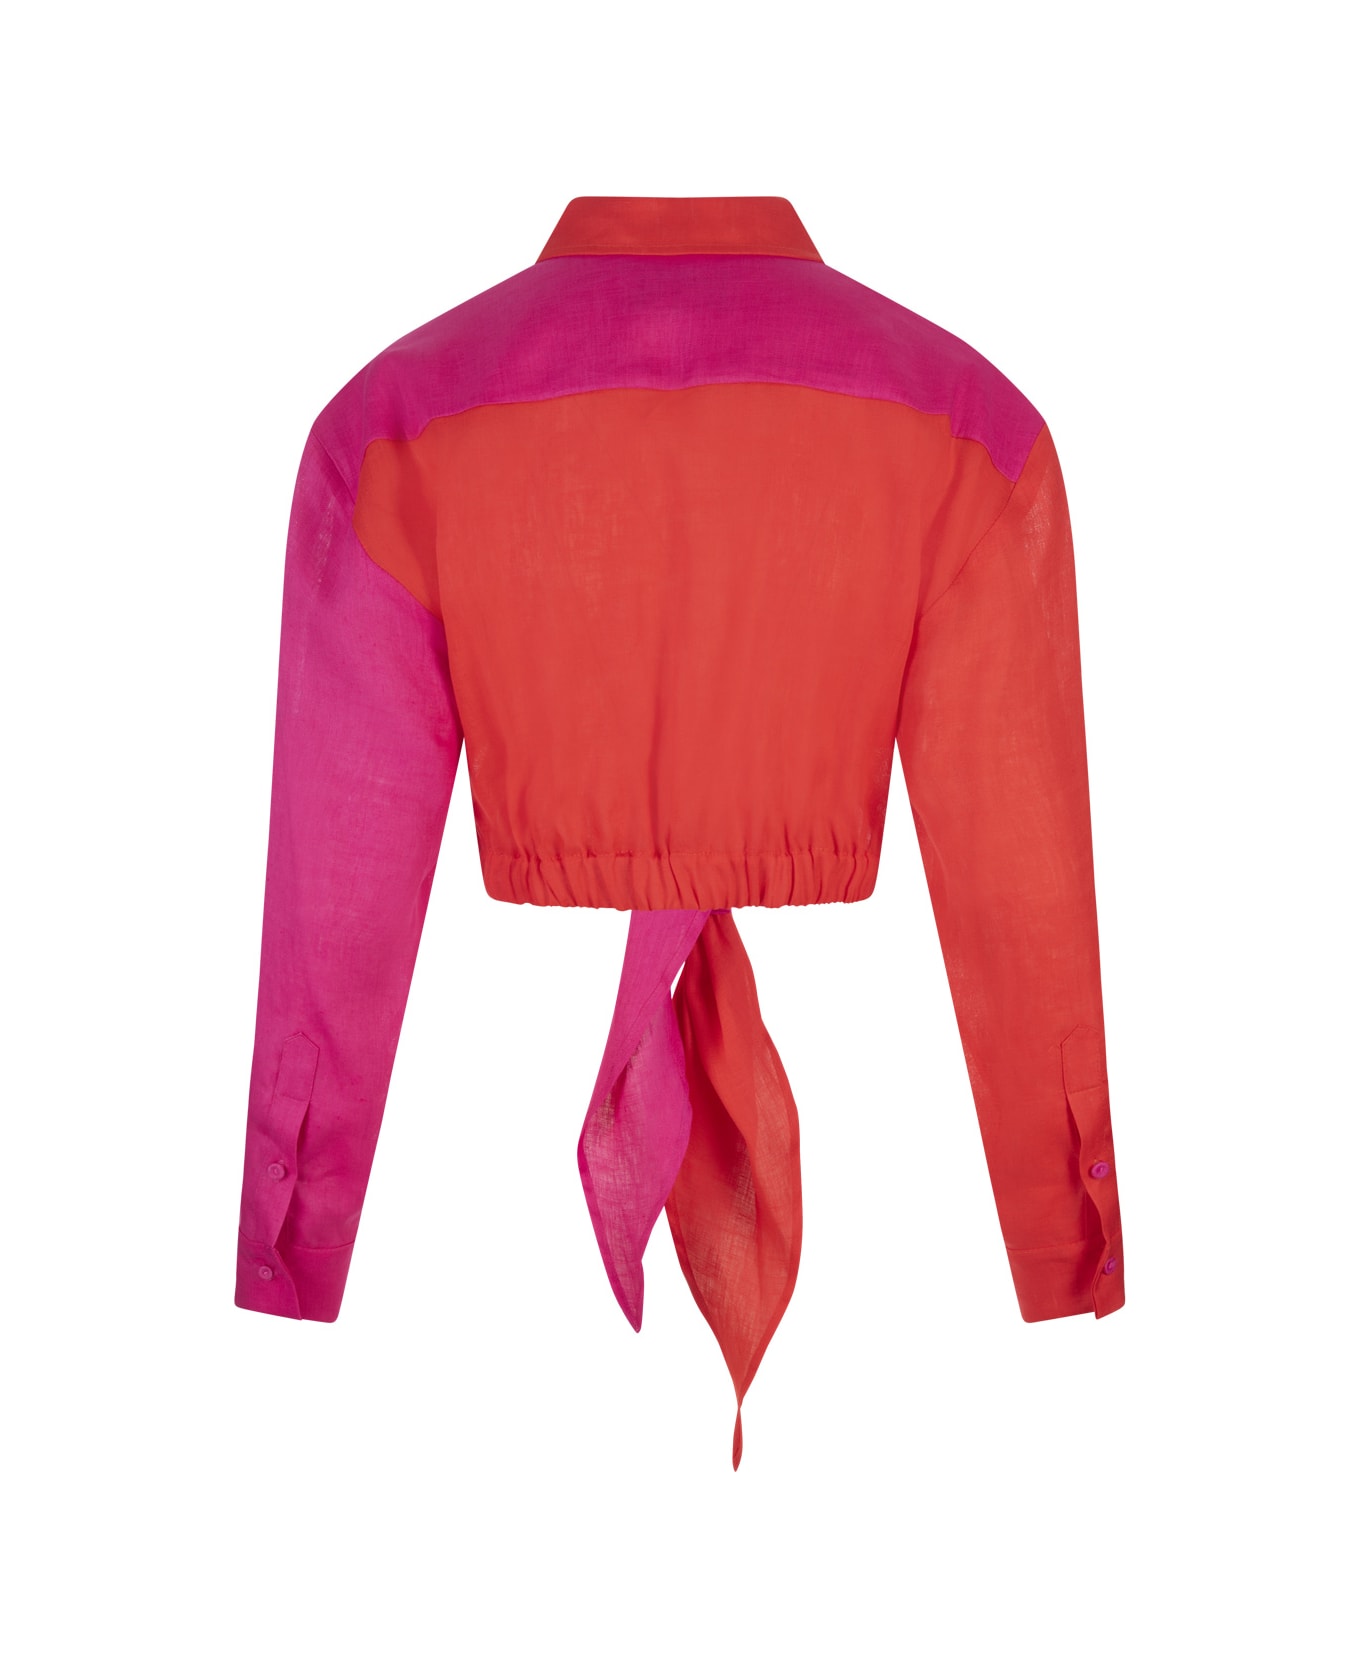 Alessandro Enriquez Red And Fuchsia Short Shirt With Knot - Red